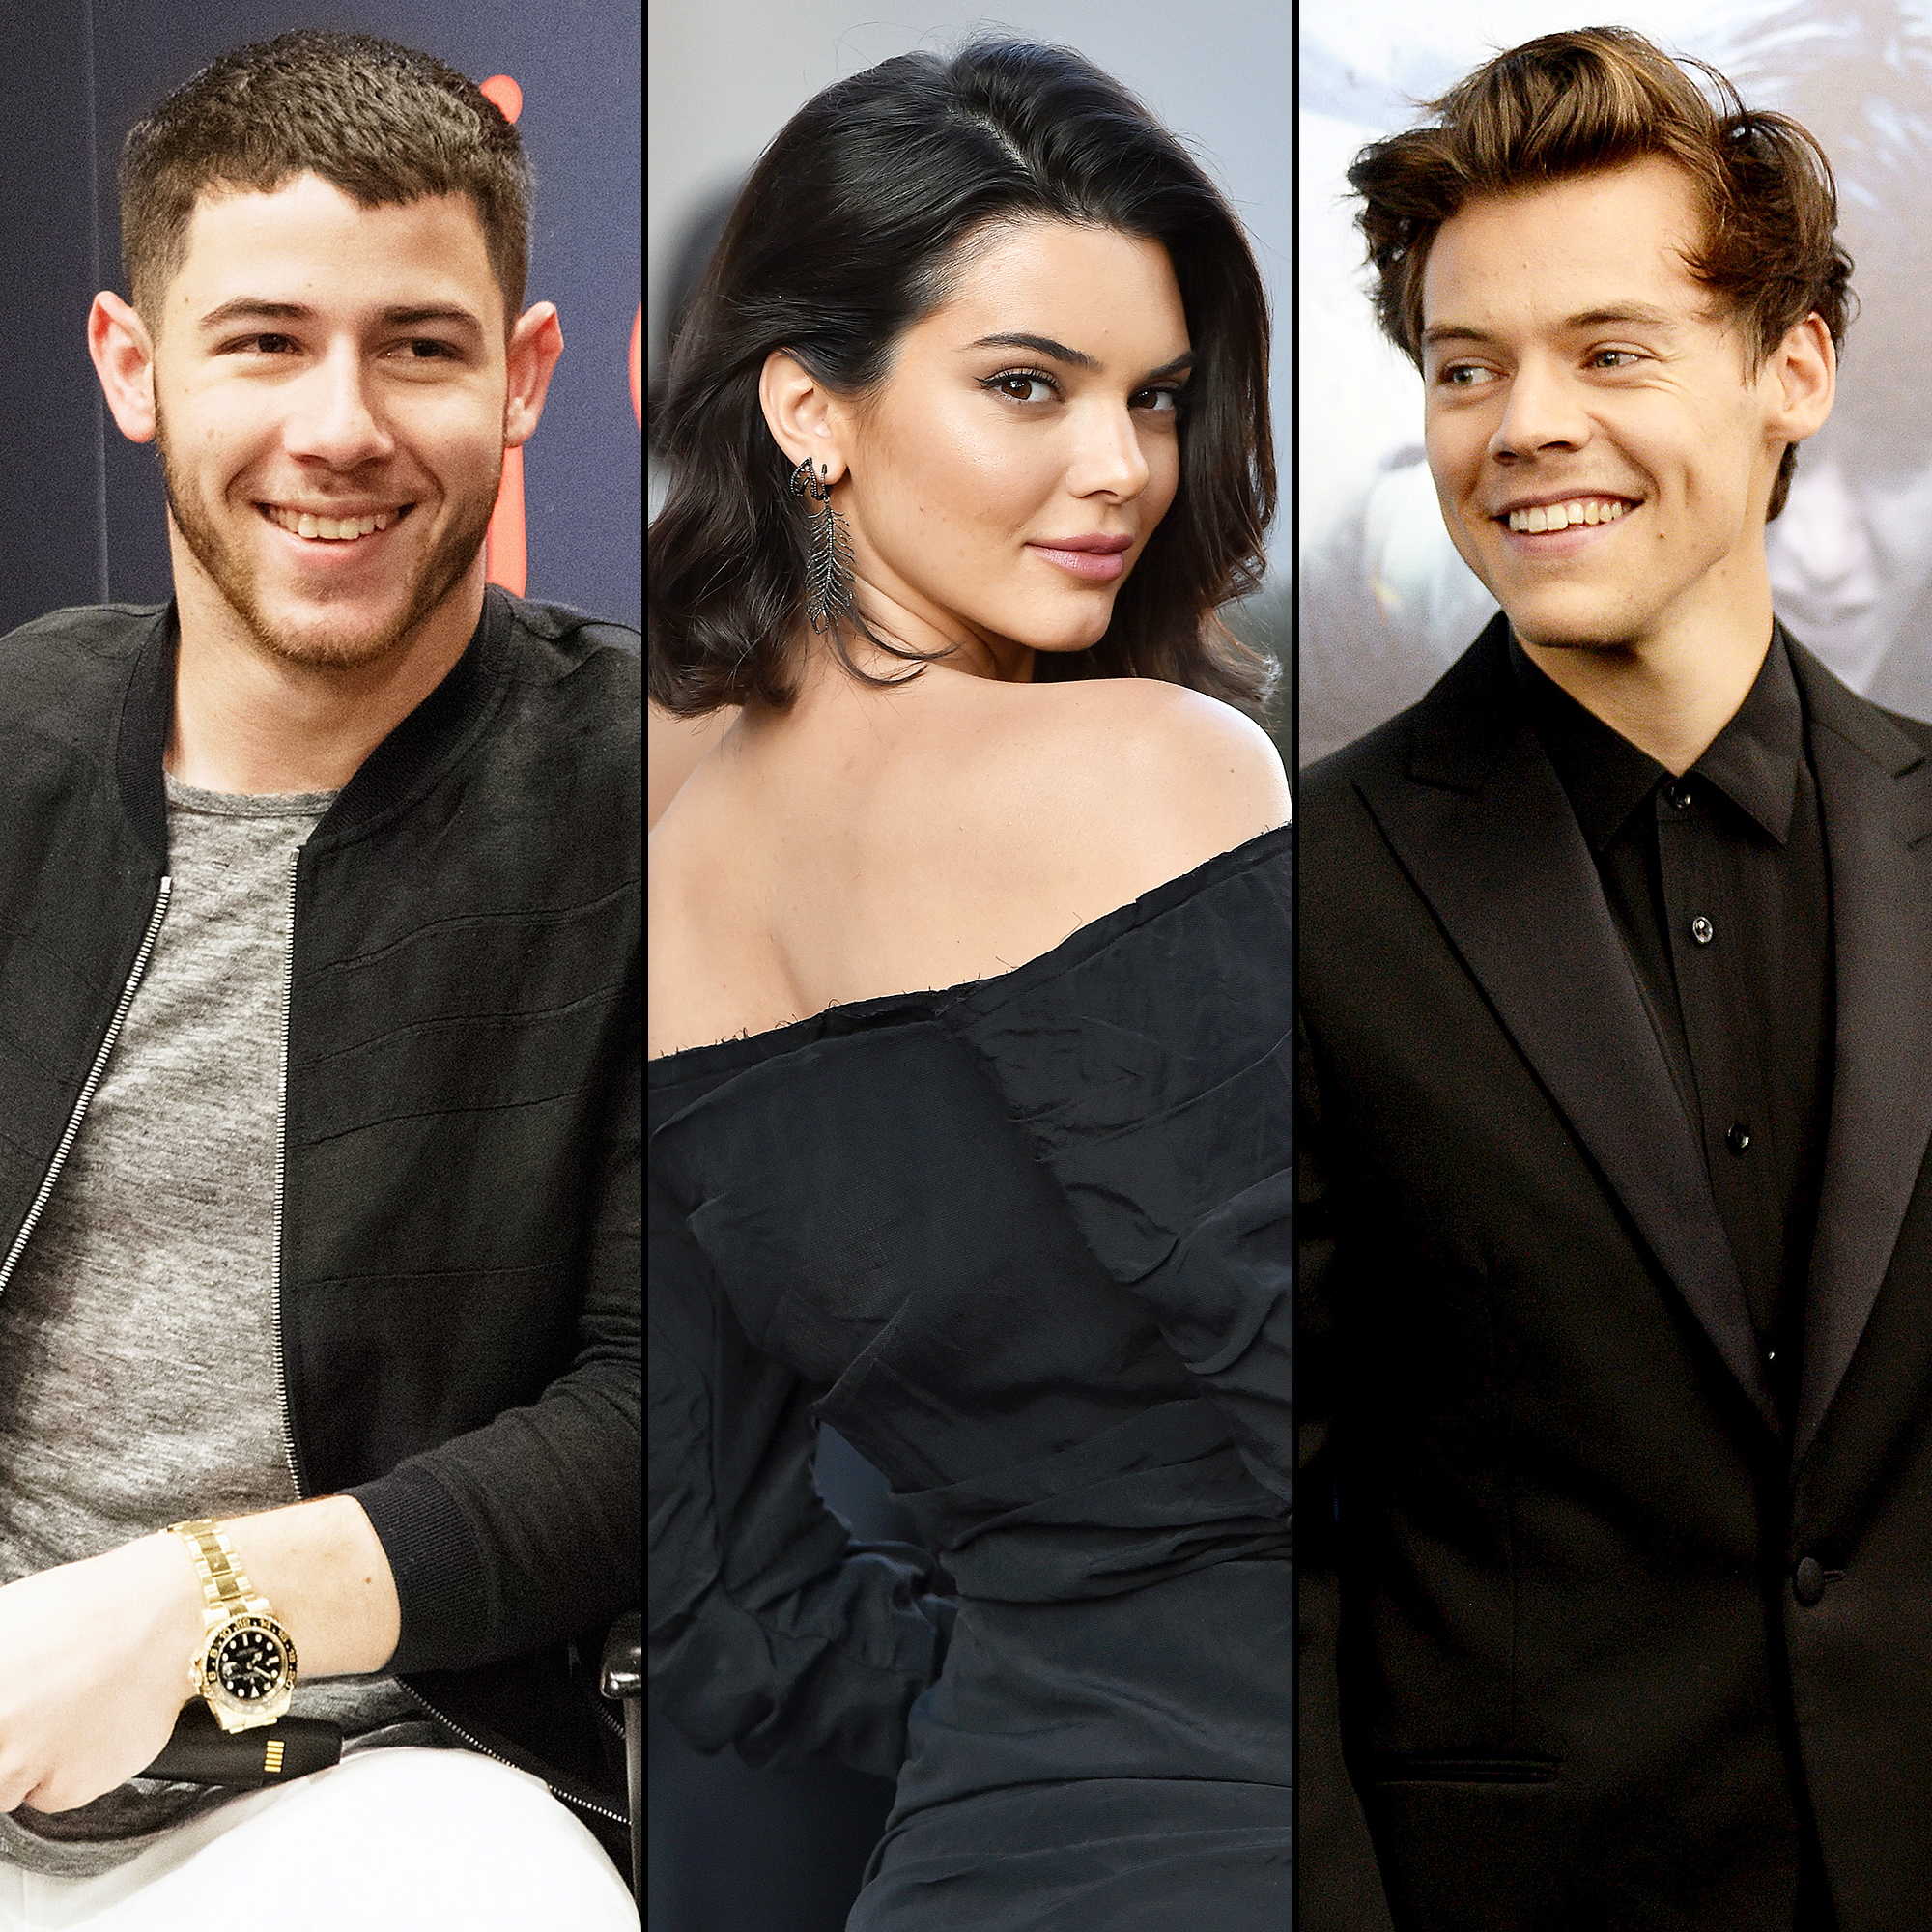 Boyfriend D*ck, Guys Group Chats and Khloe Kardashian With Harry